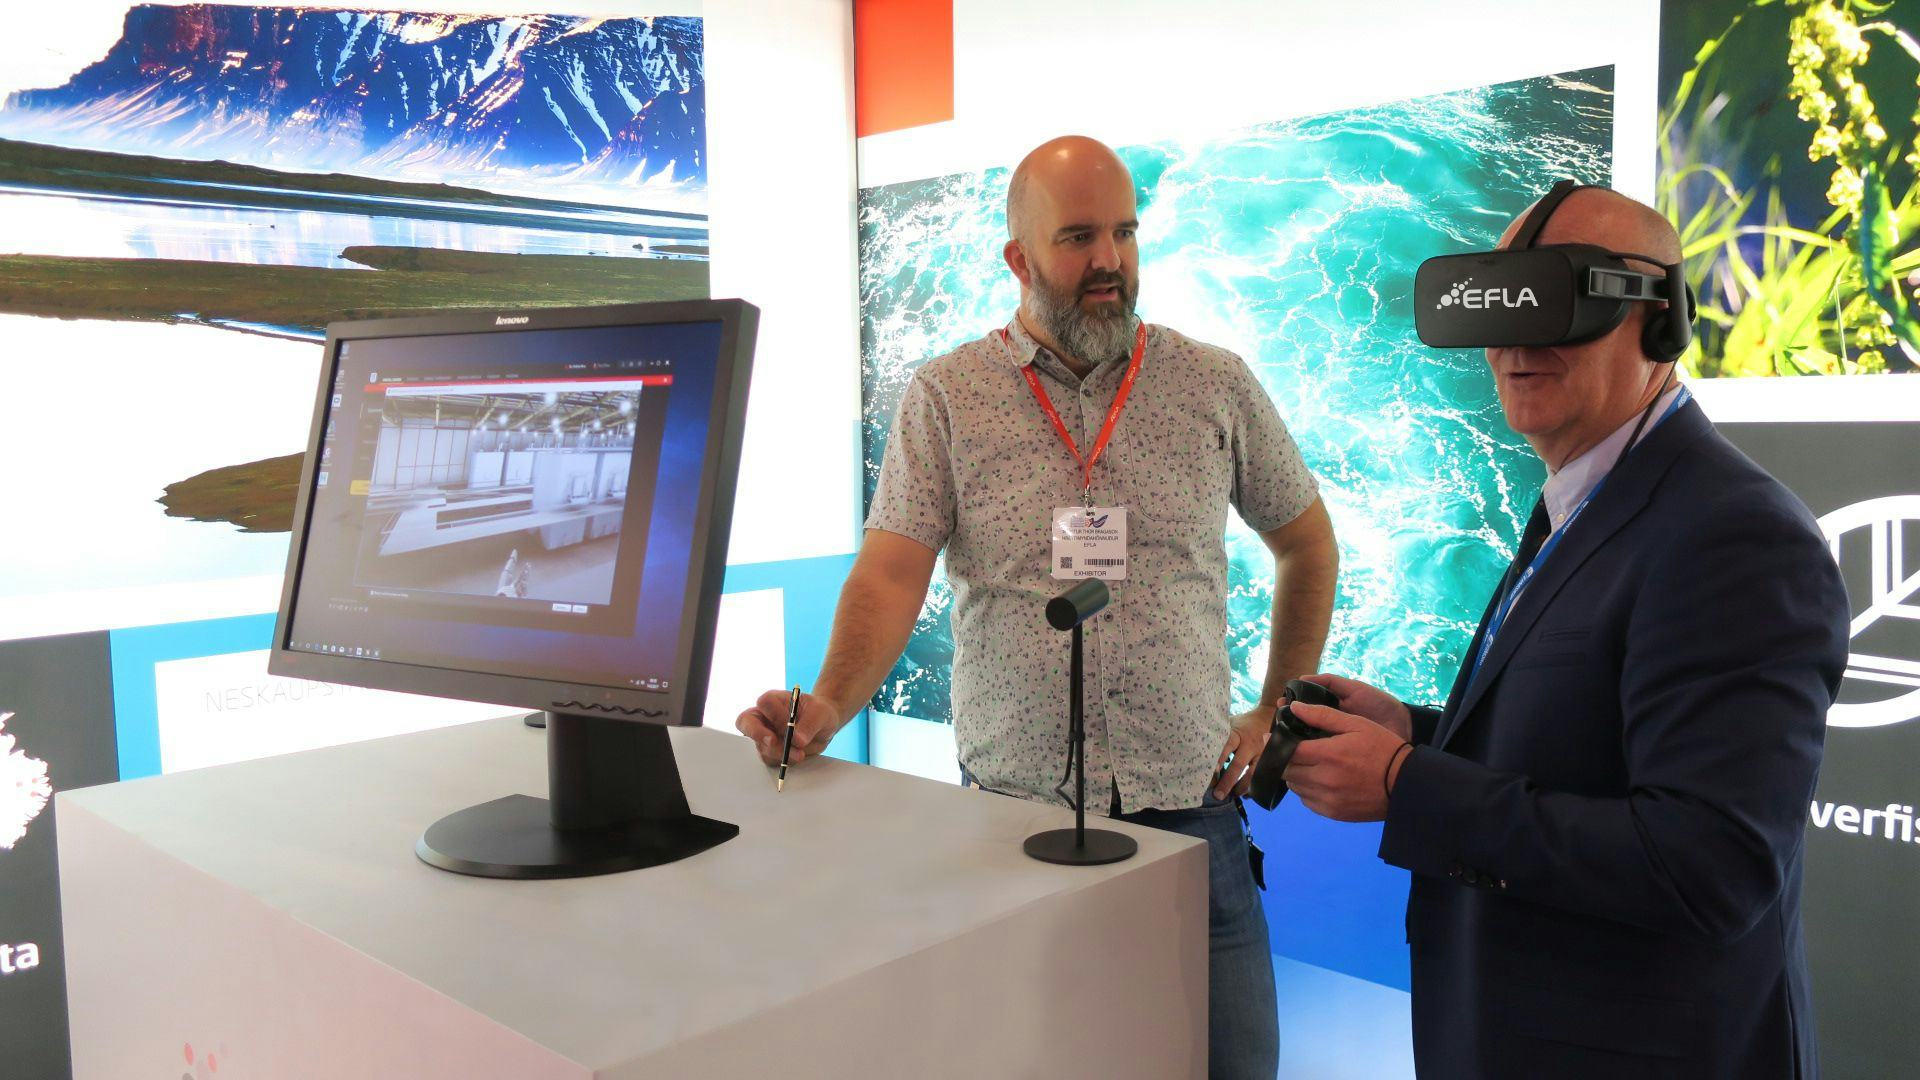 Two men at a exhibition, with one man demonstrating a VR set